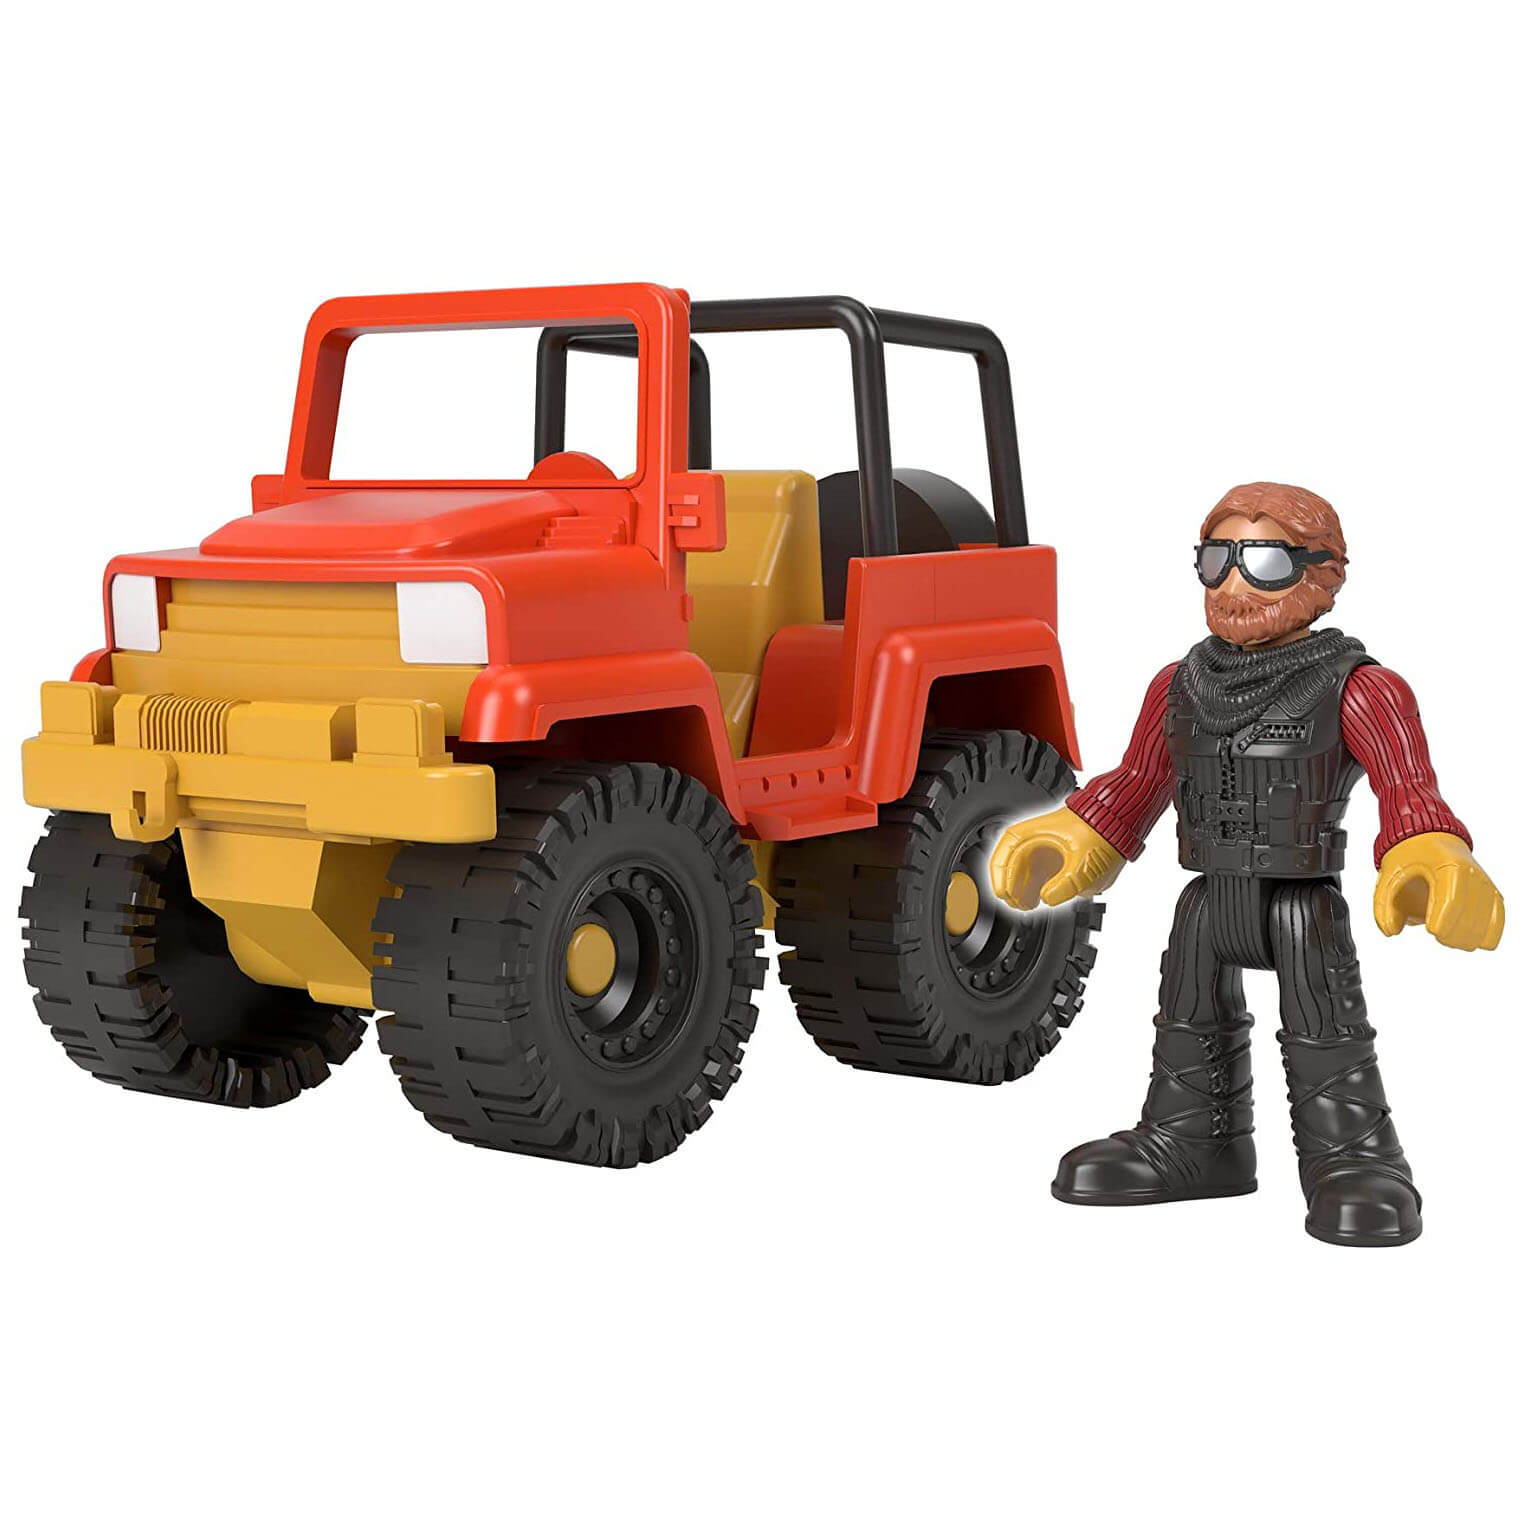 Fisher-Price Imaginext Push-Along Offroad Racer